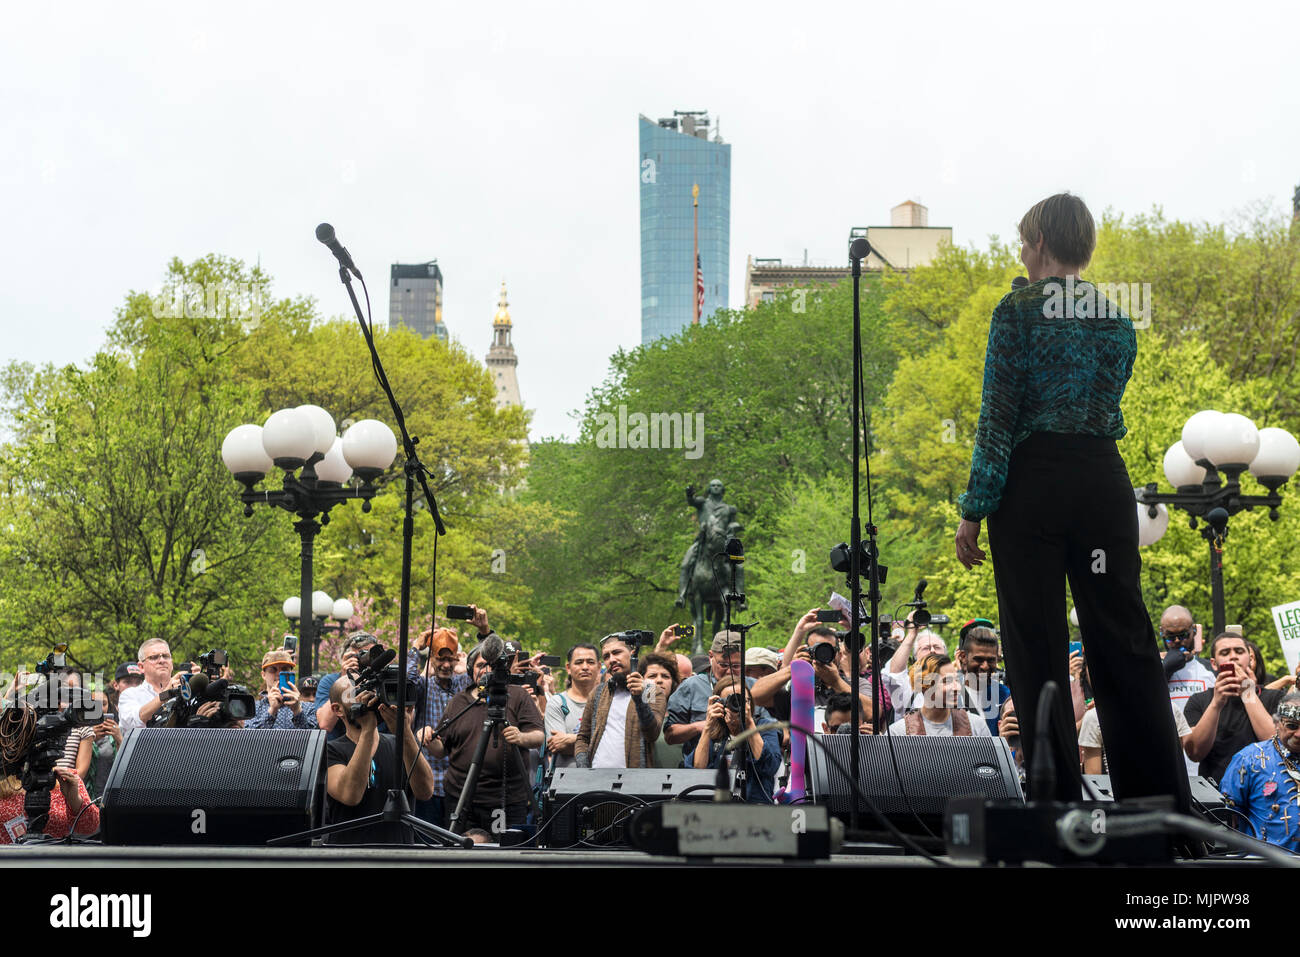 New York, NY, USA - 5 May 2018 - Democratic gubernatorial Candidate and Sex in the City star, Cynthia Nixon, campaigns at the Million Marijuana Rally in Union Square. CREDIT ©Stacy Walsh Rosenstock/Alamy Live News Stock Photo